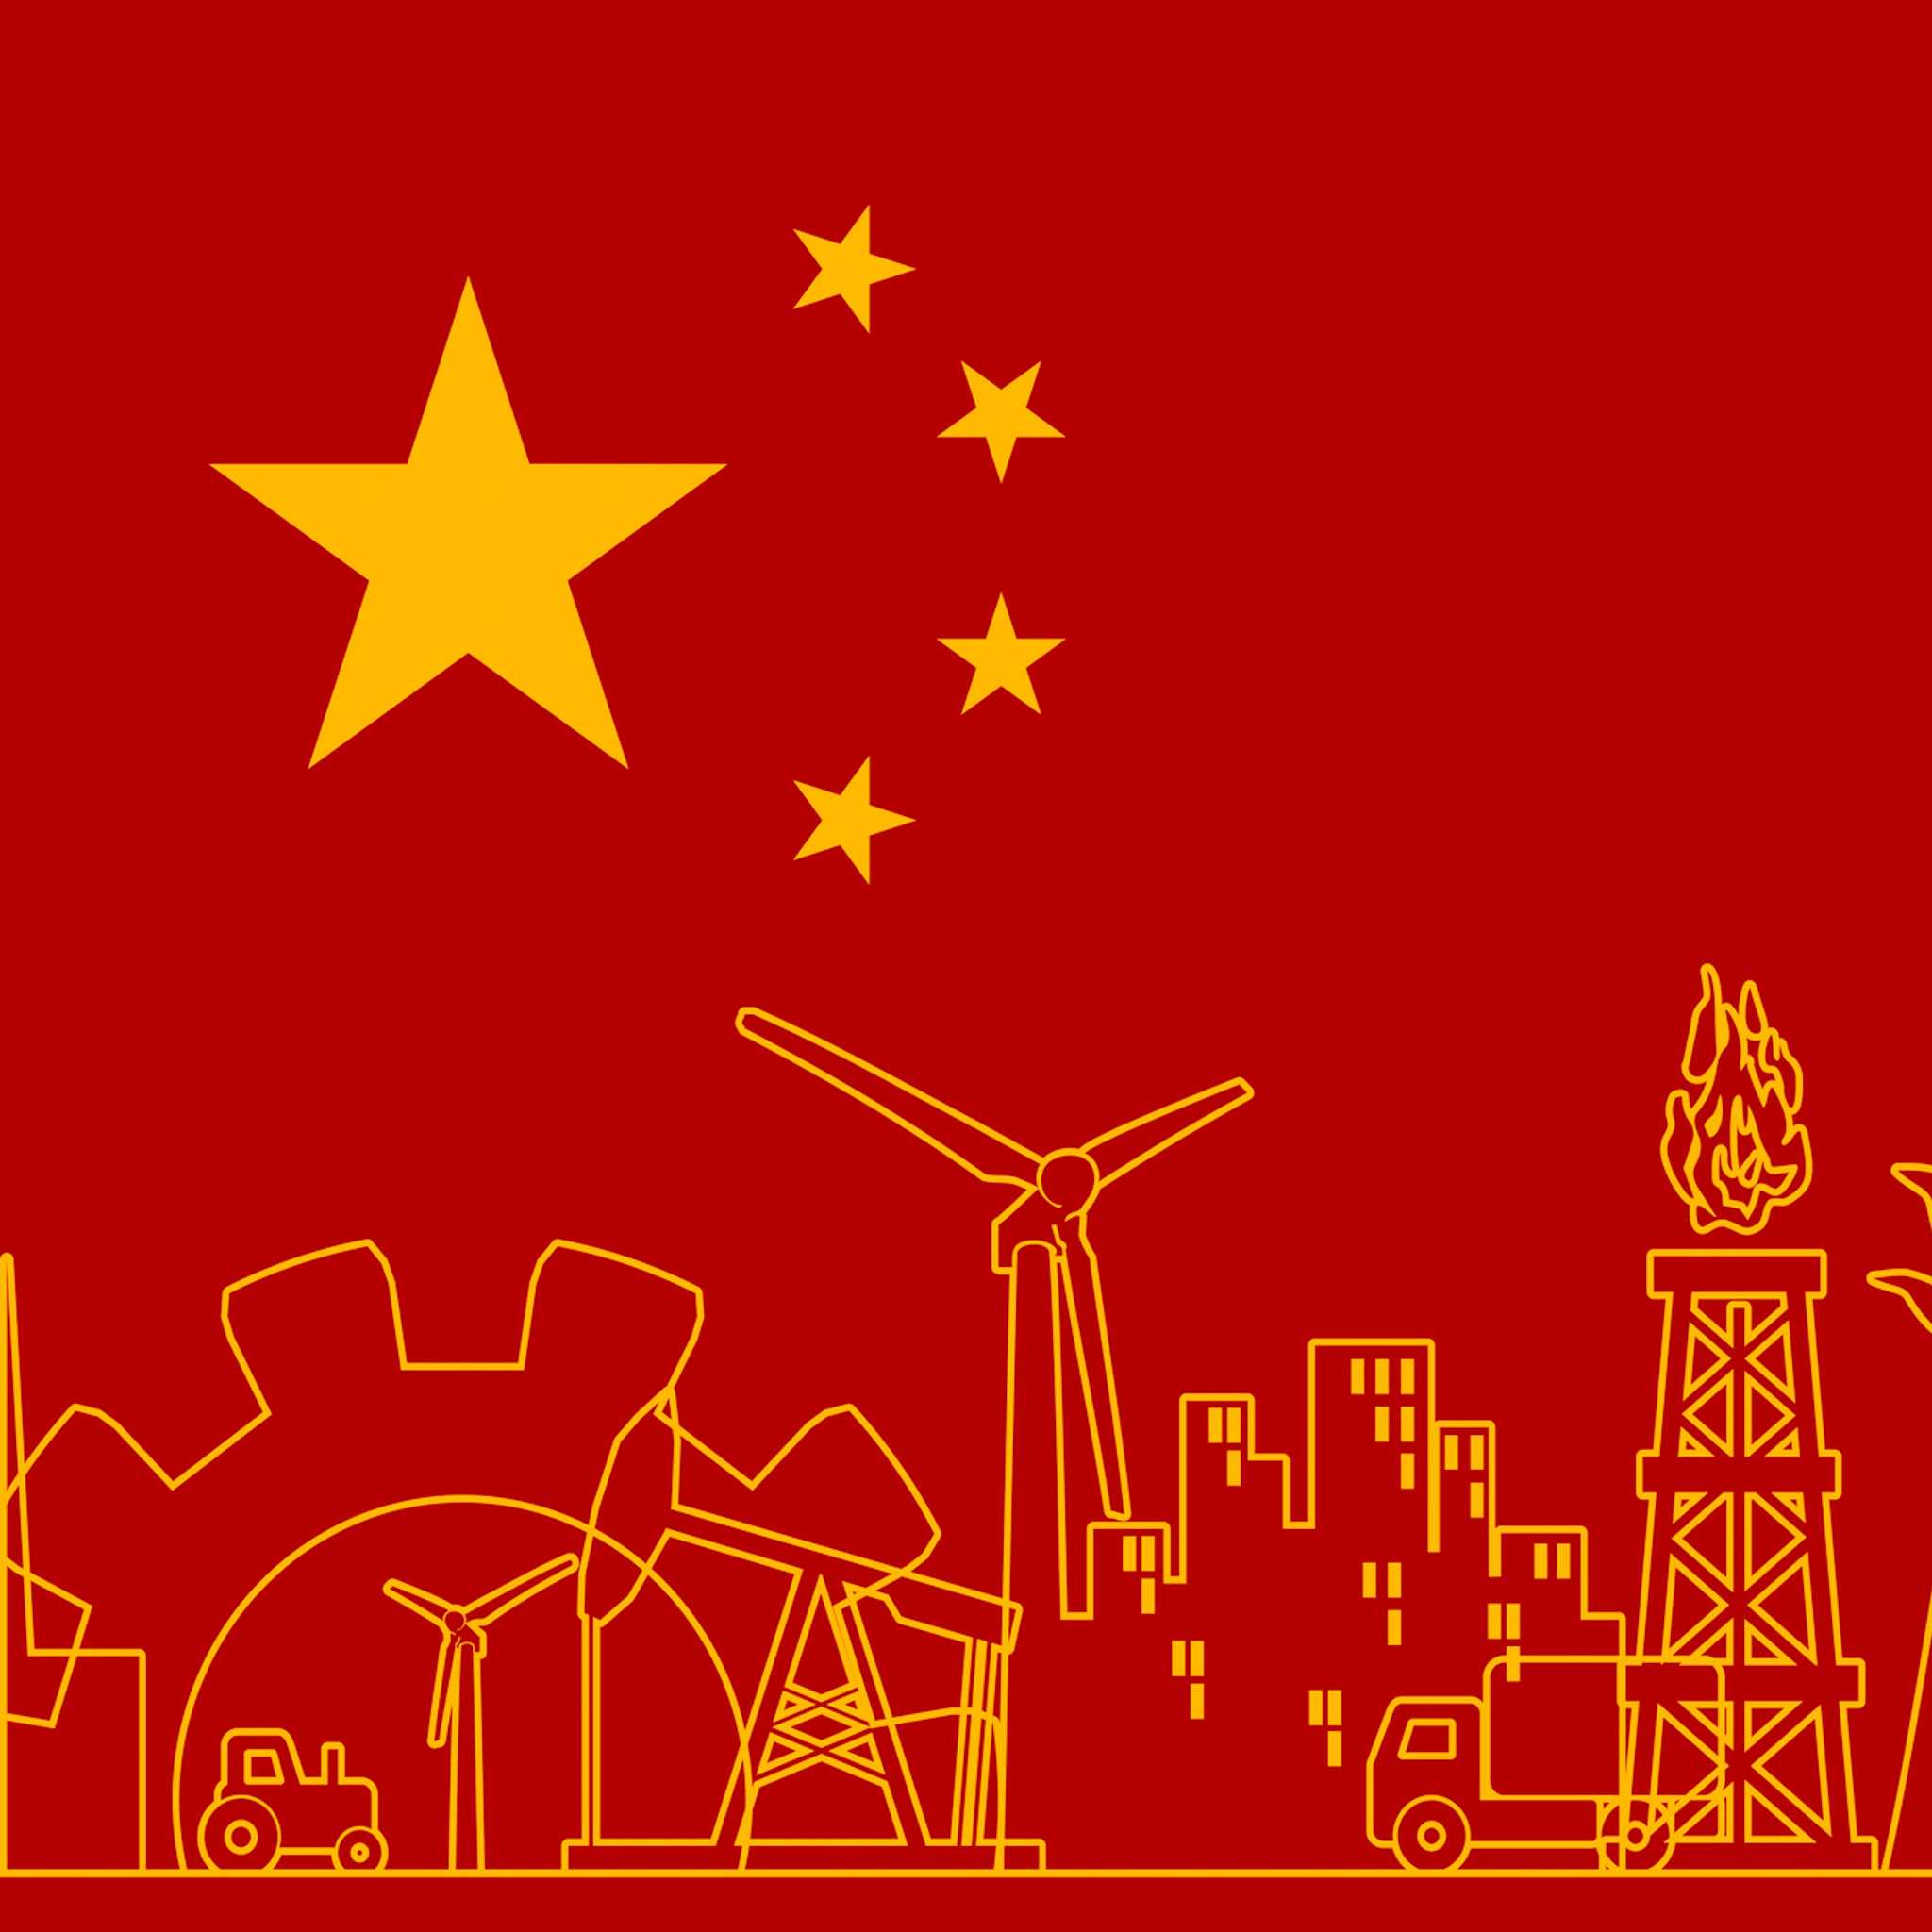 Light Speed: The Outlook for China’s Rapidly Growing New Energy Capacity